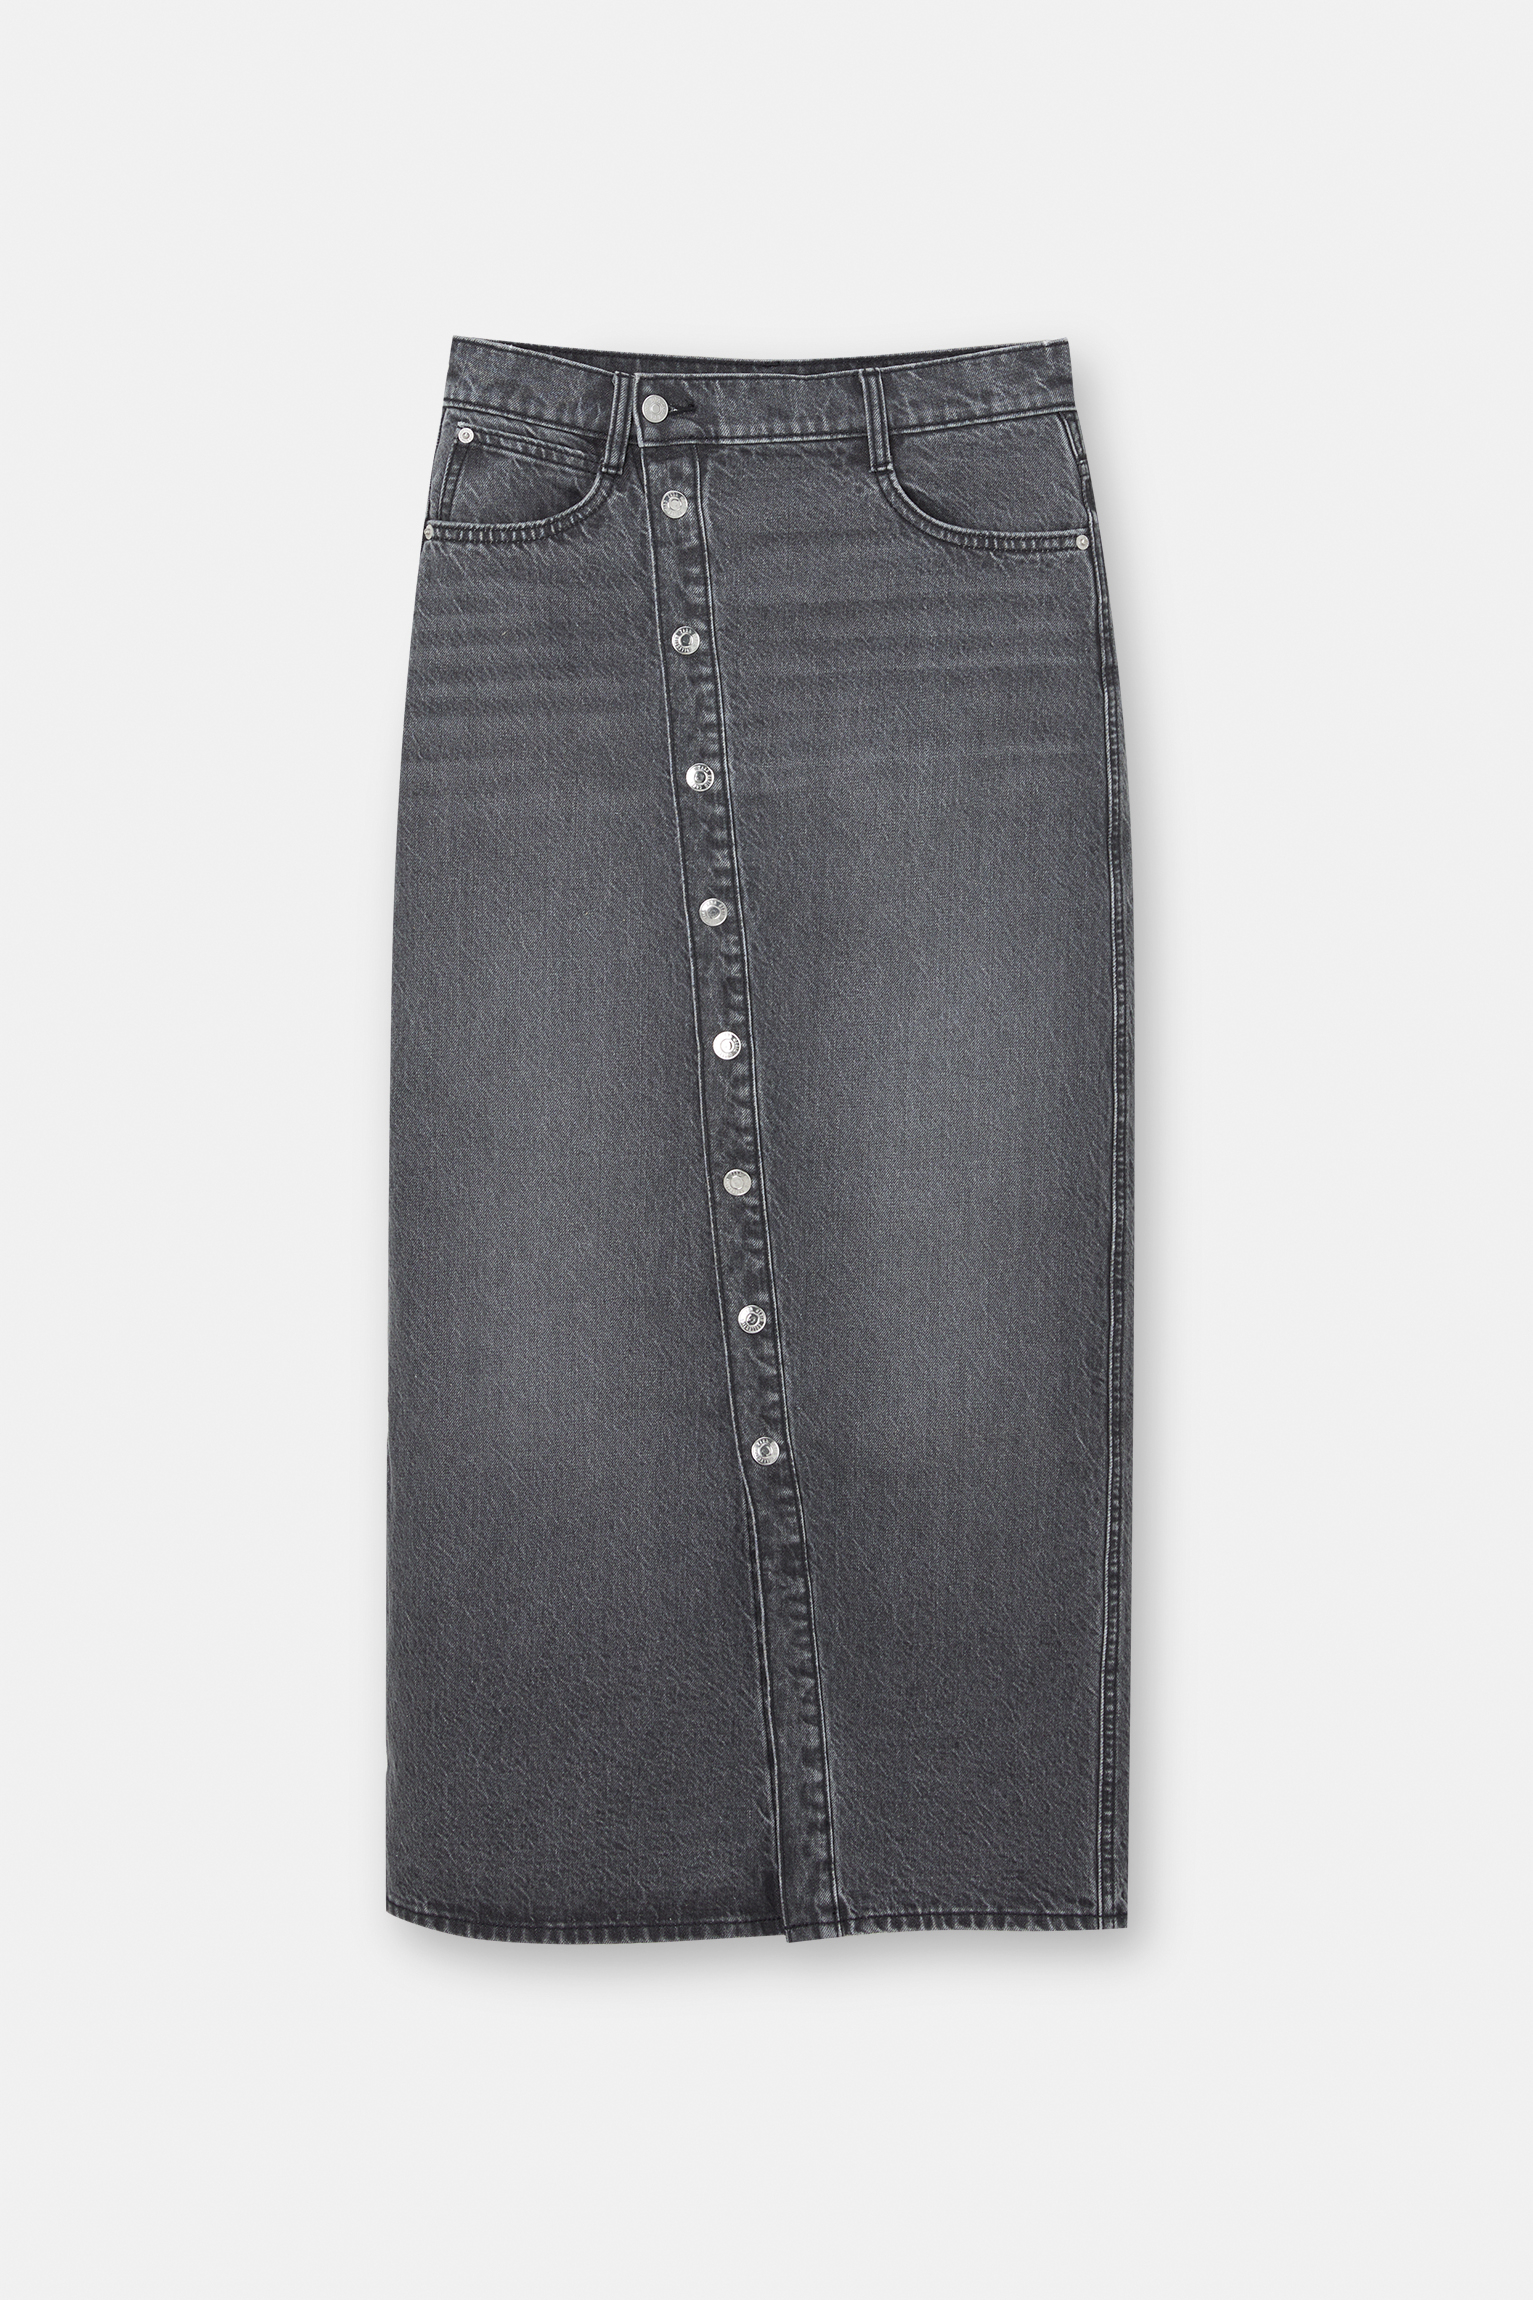 Extra-long denim skirt with buttons